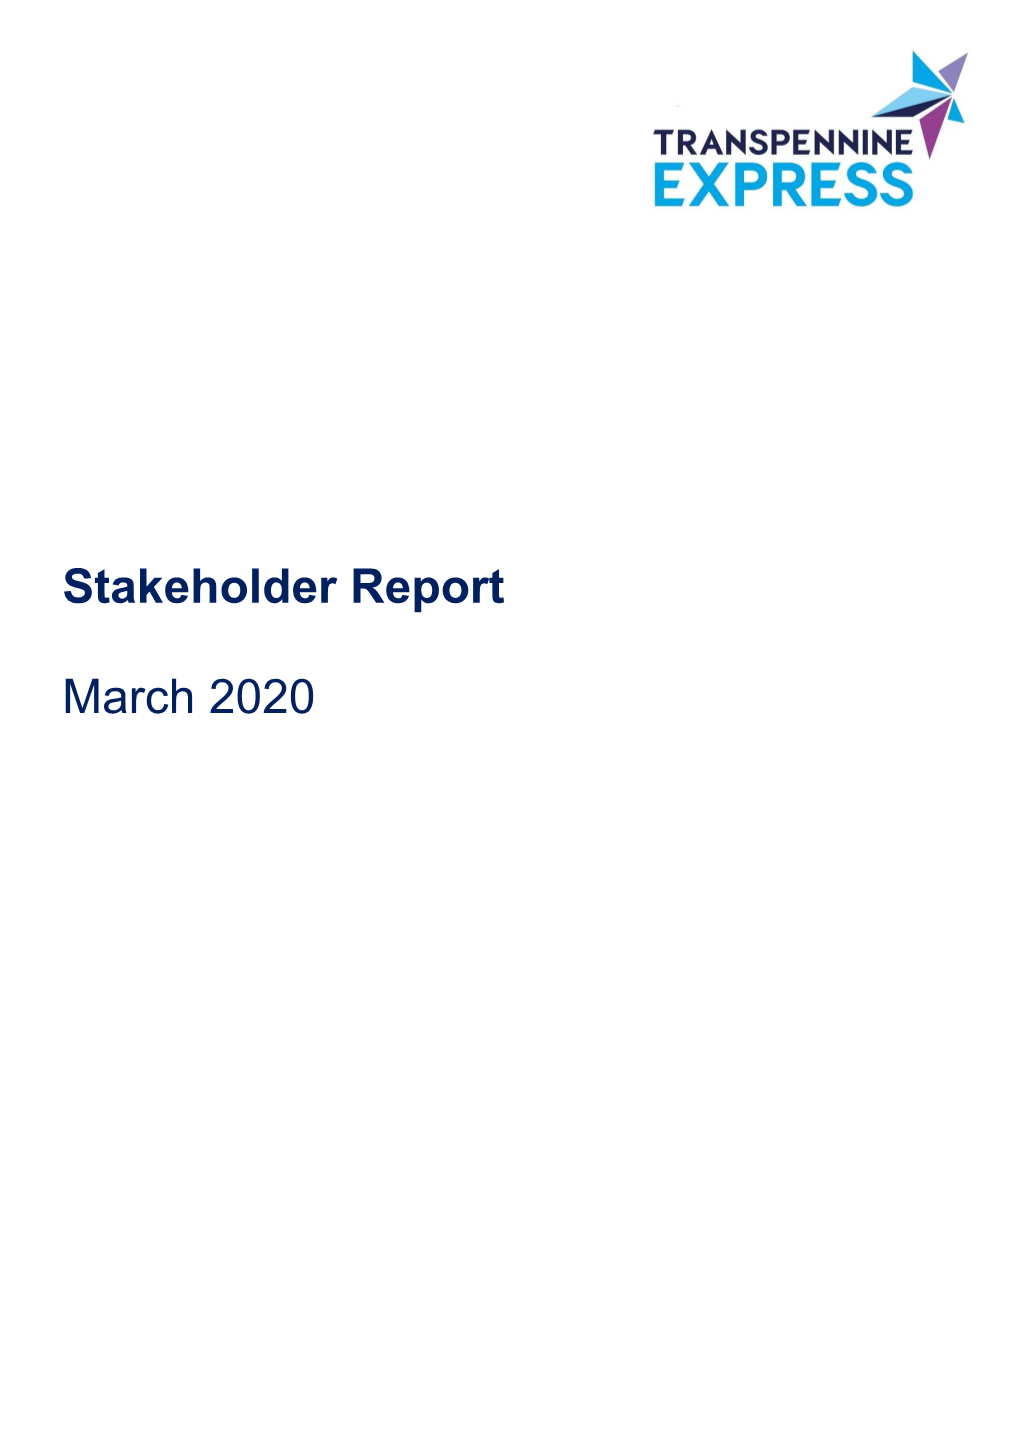 Stakeholder Report March 2020 ______Contents